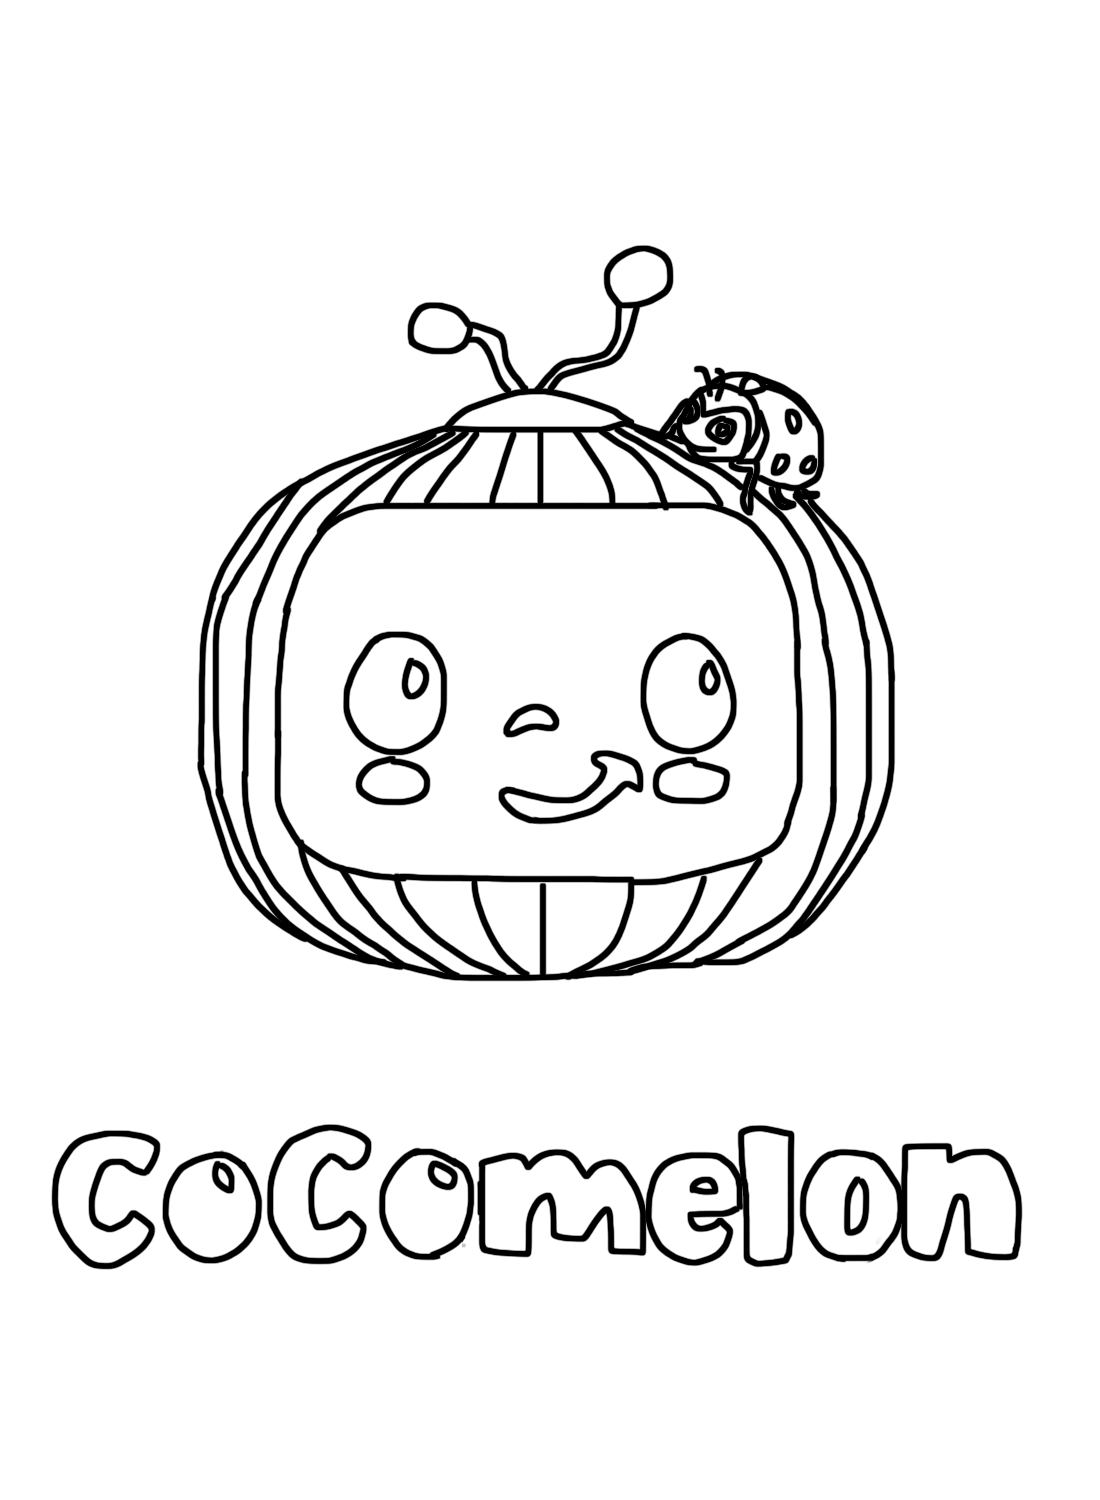 Coloring Pages Cocomelon Drawing - Free Printable Coloring Pages